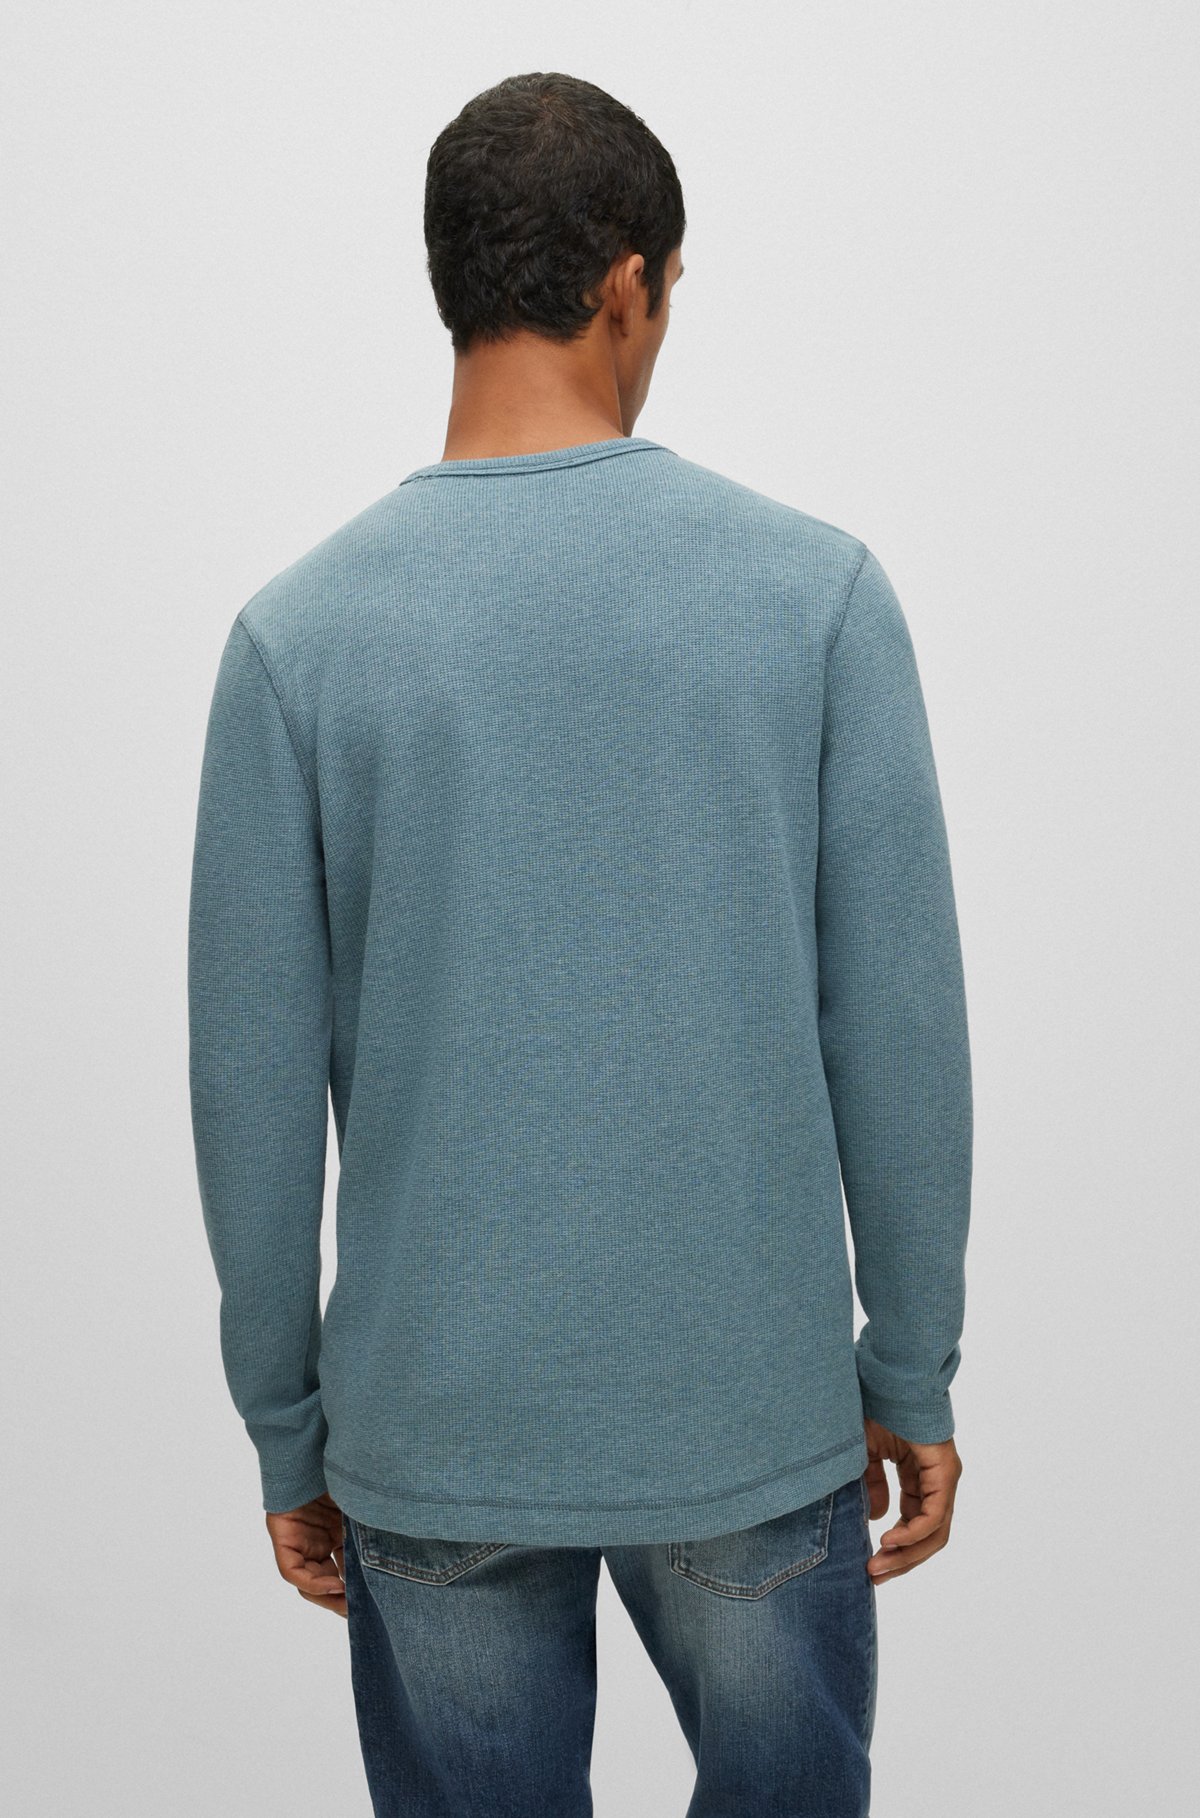 Long-sleeved T-shirt in a waffle-structured cotton blend, Blue